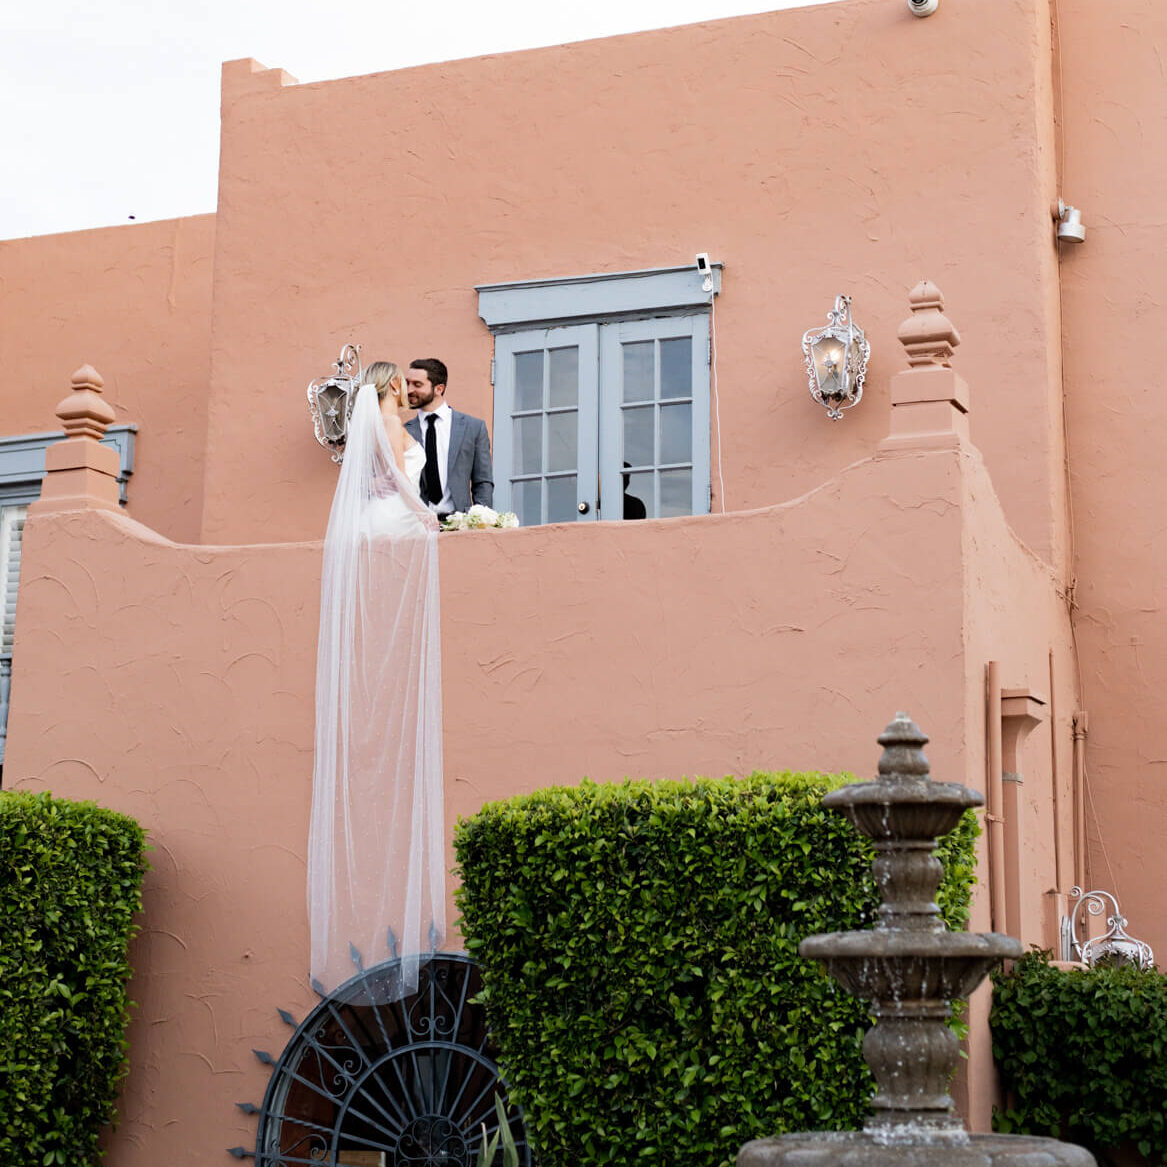 Bride and groom standing on a balcony and kissing with the bride's veil hanging off the balcony.